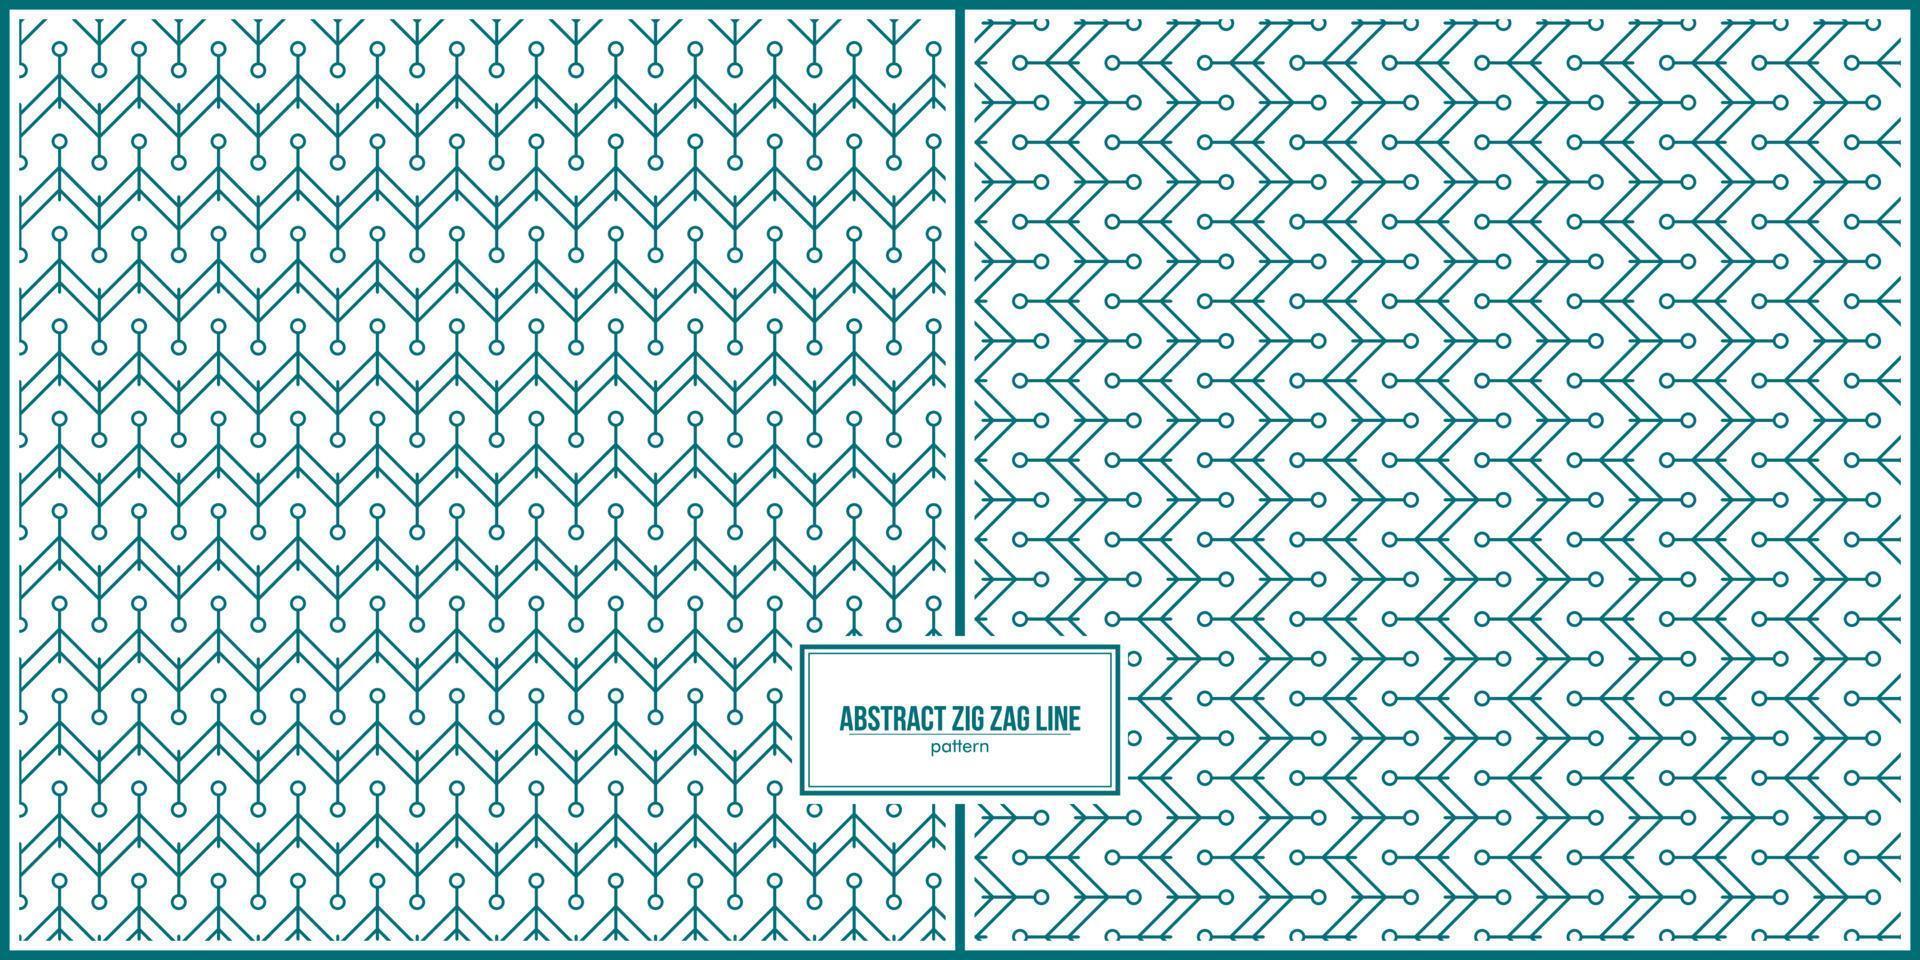 abstract zig-zag vertical and horizontal line pattern vector